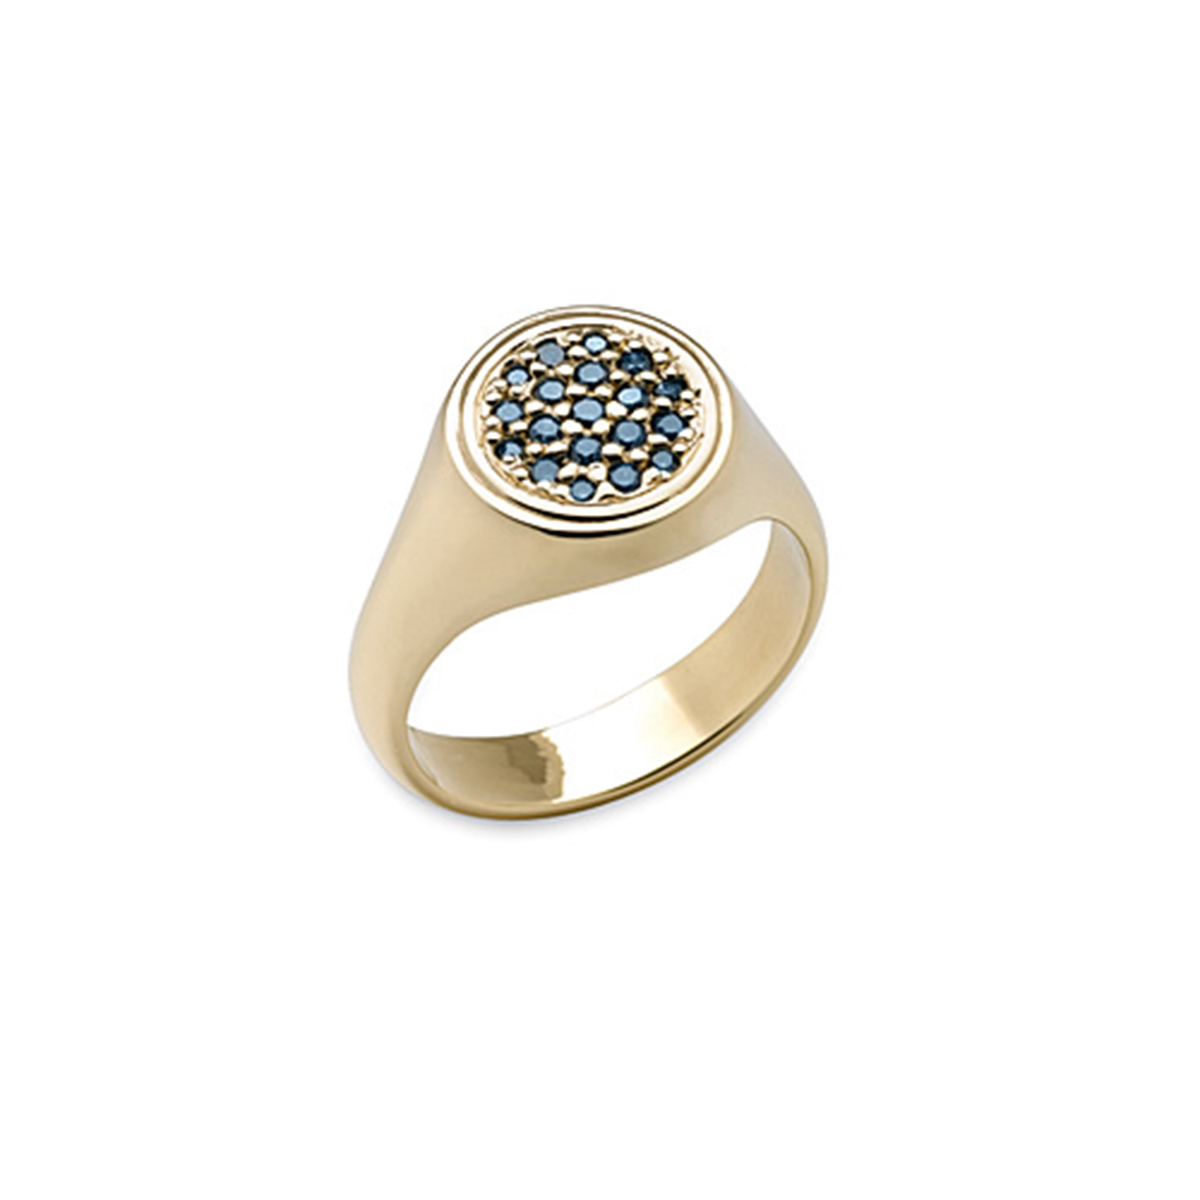 SRH Images_008_Gold Ring with Pave Blue Diamonds.jpg